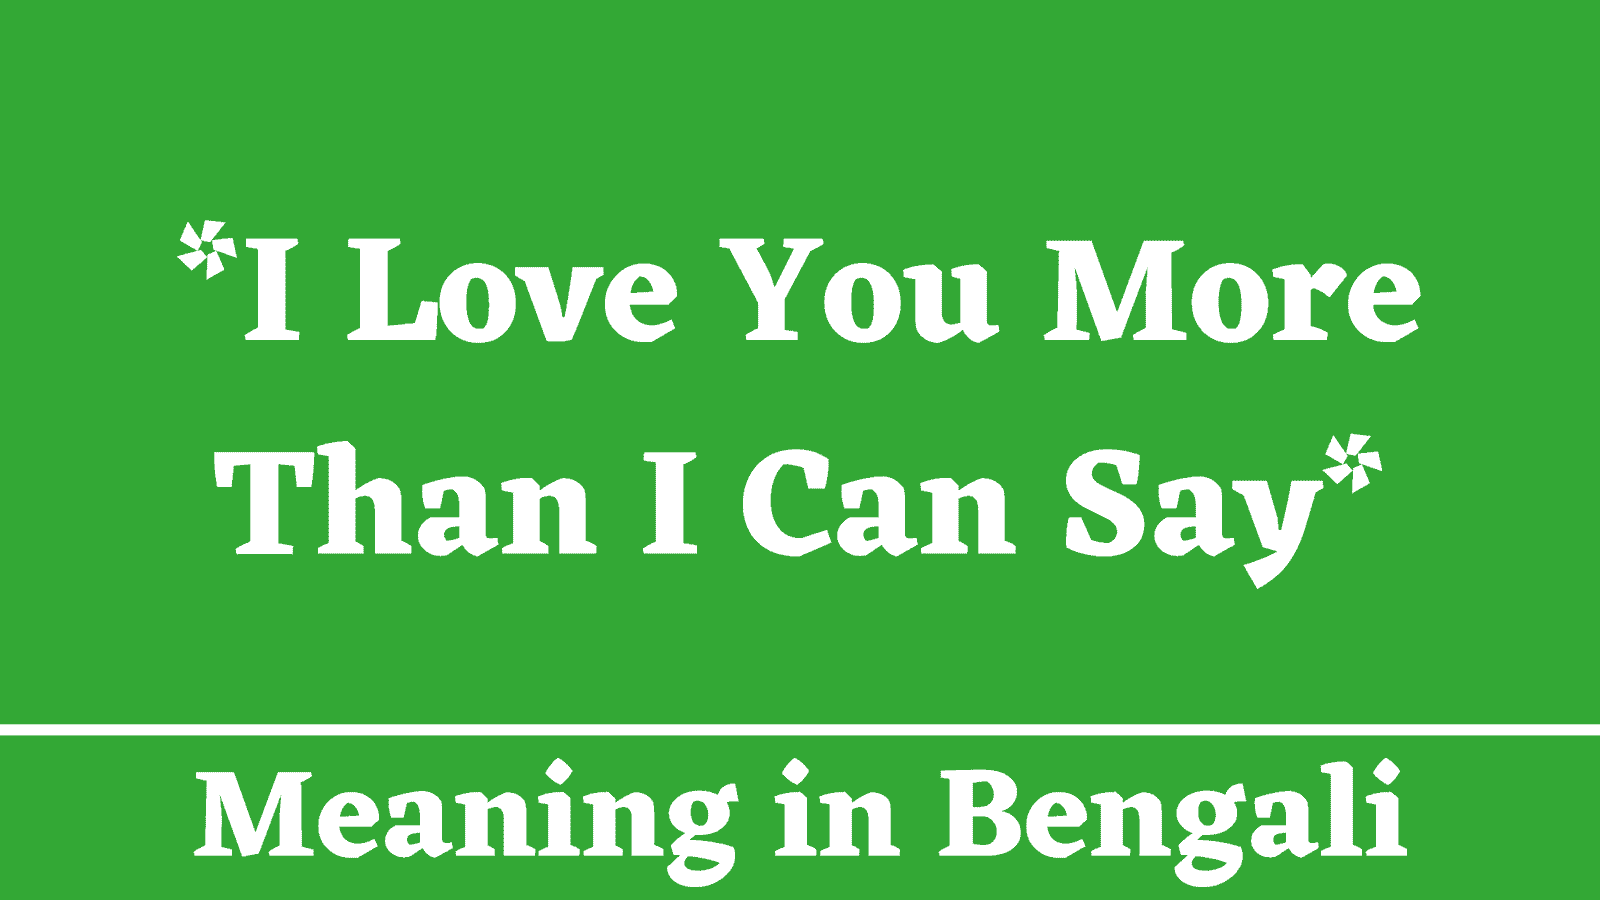 I Love You More Than I Can Say Meaning in Bengali